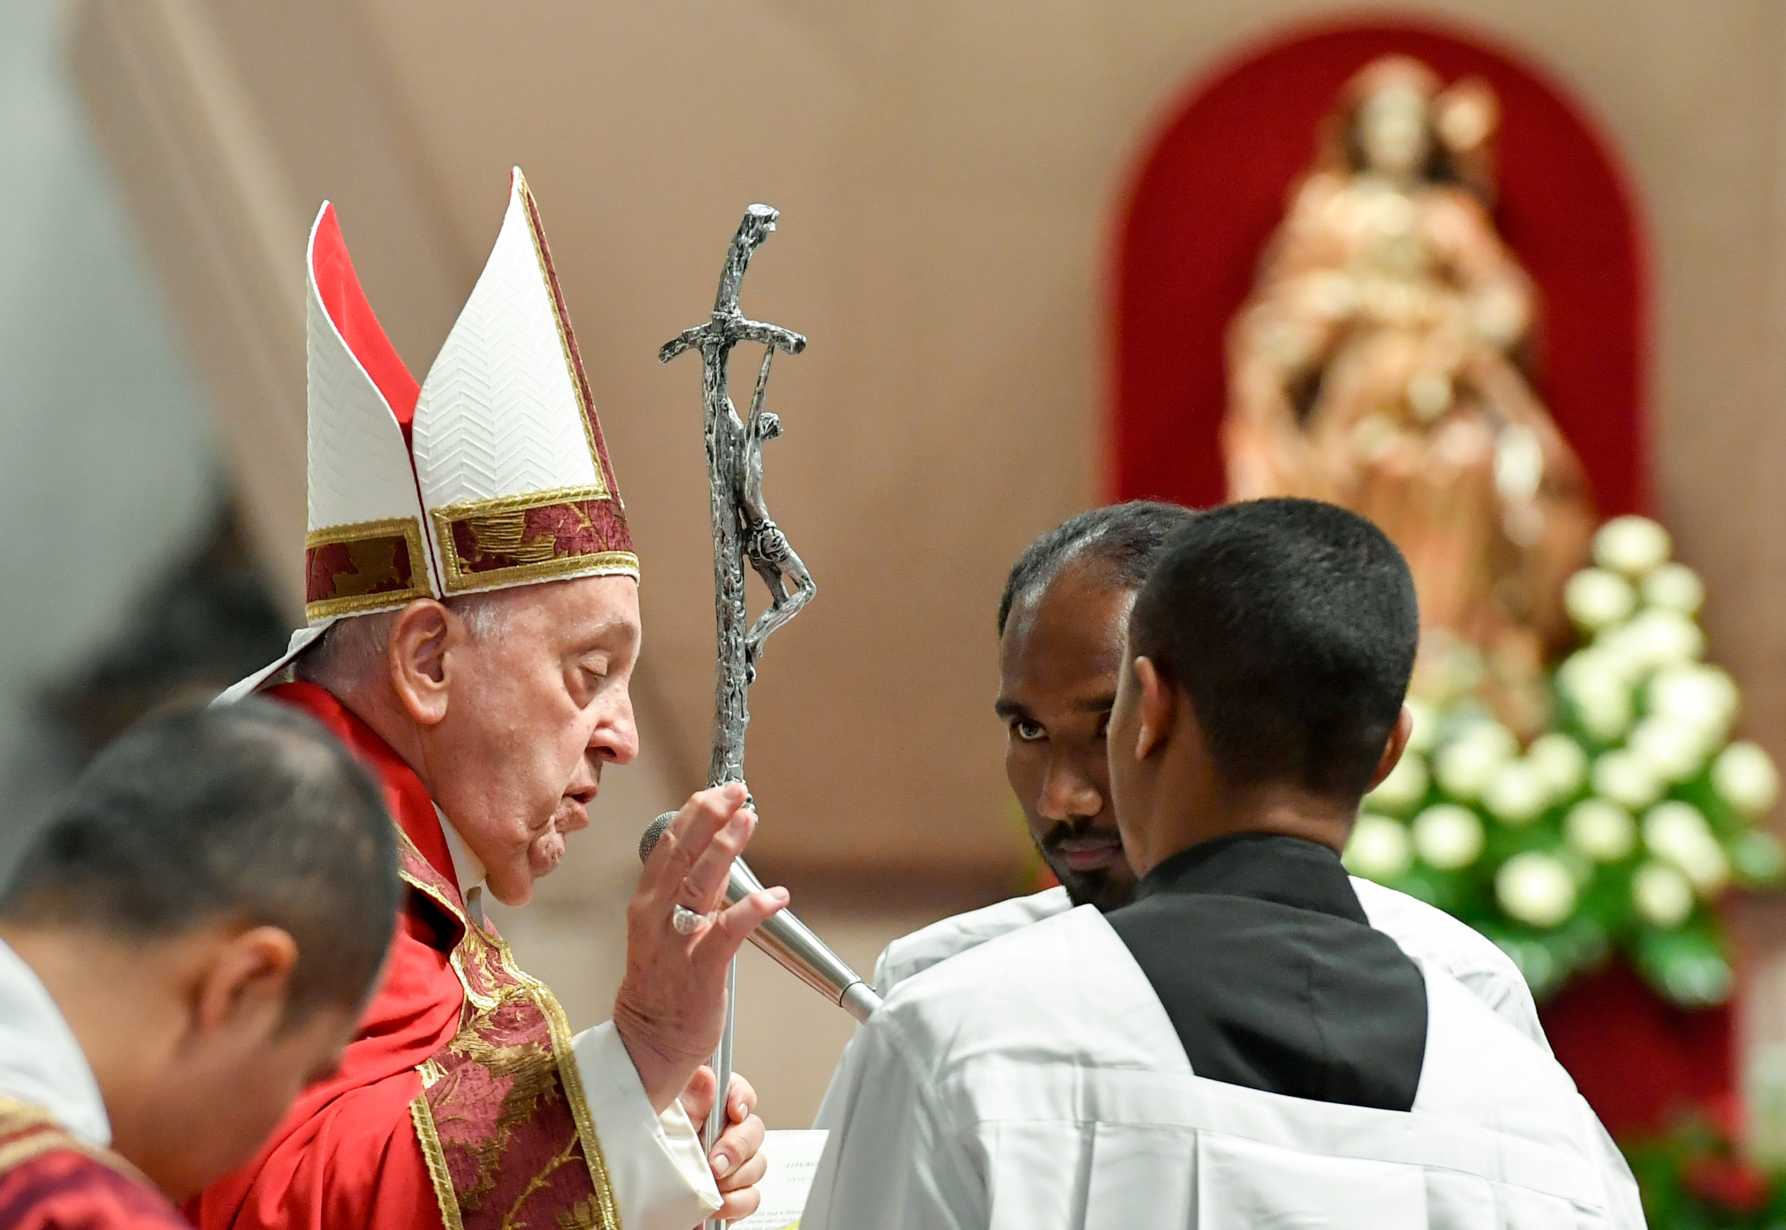 Holy Spirit makes Christians gentle, not 'overbearing,' pope says